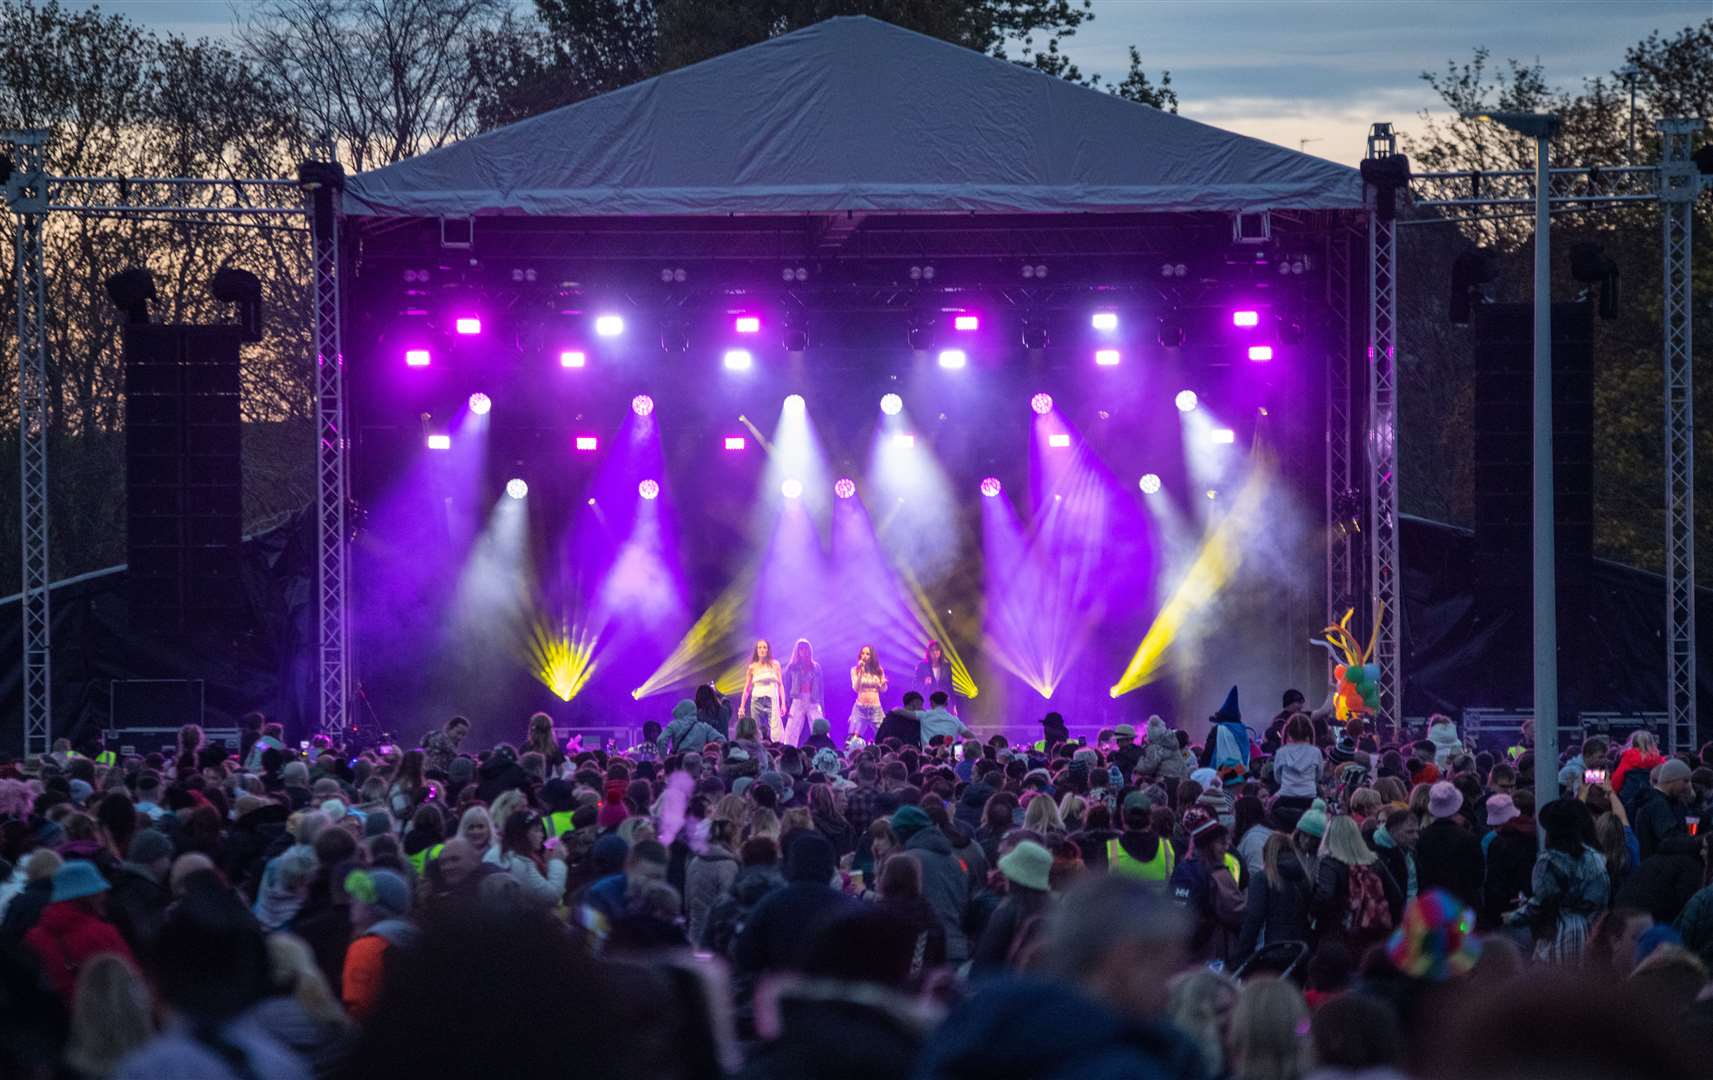 Crowds gather to watch B*Witched, who were last on stage on Saturday at Cooper Park. Picture: Daniel Forsyth